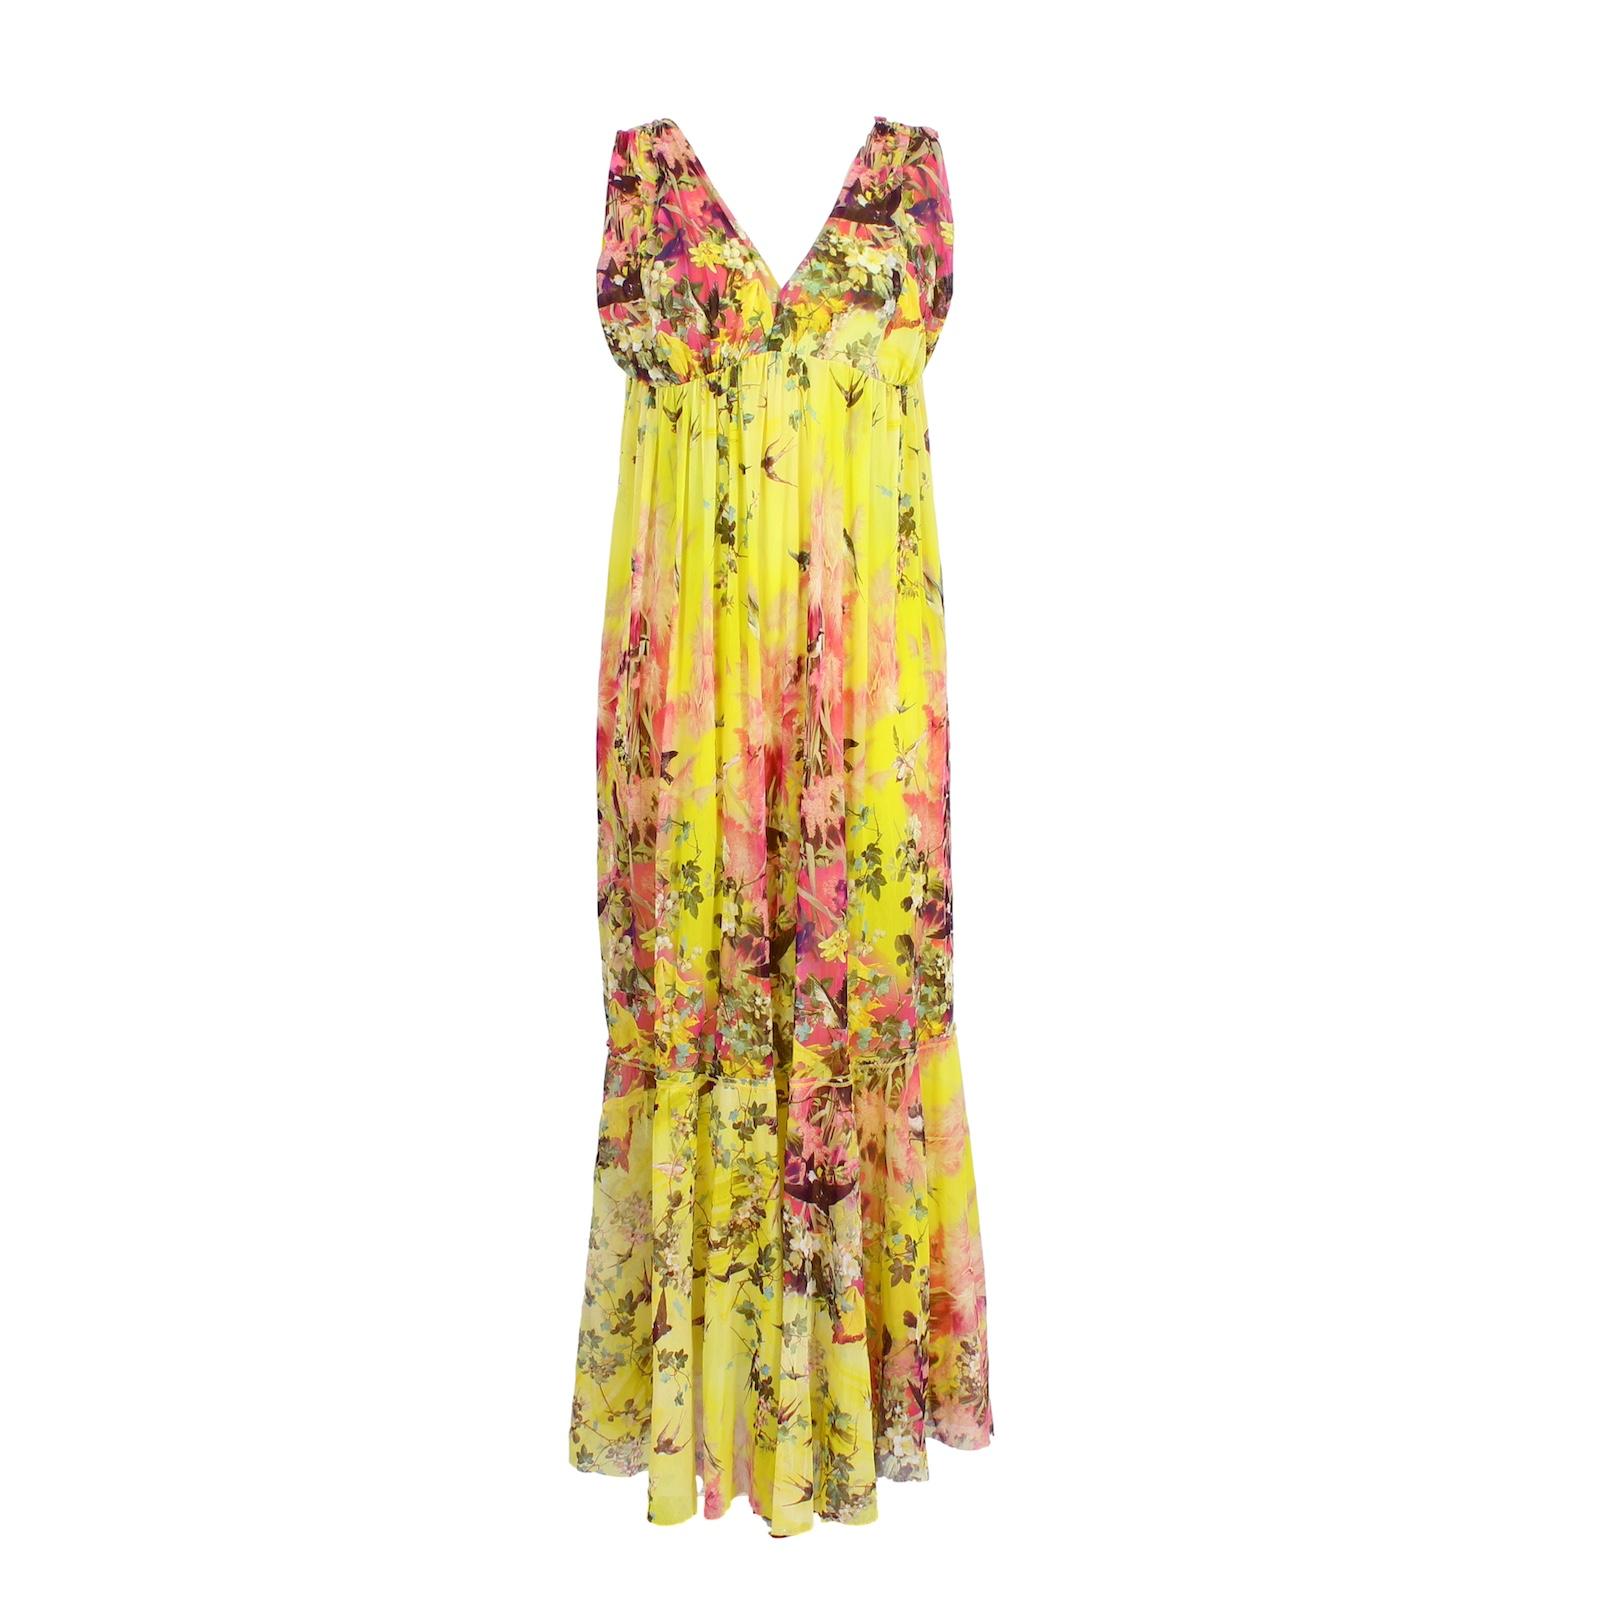 The Jean Paul Gaultier Soleil Yellow Long Dress from the 2000s is an eye-catching dress adorned with floral and bird designs. Made with a Fuzzi texture and lined for comfort, this dress features a V-neck and is perfect for any occasion. Elevate your